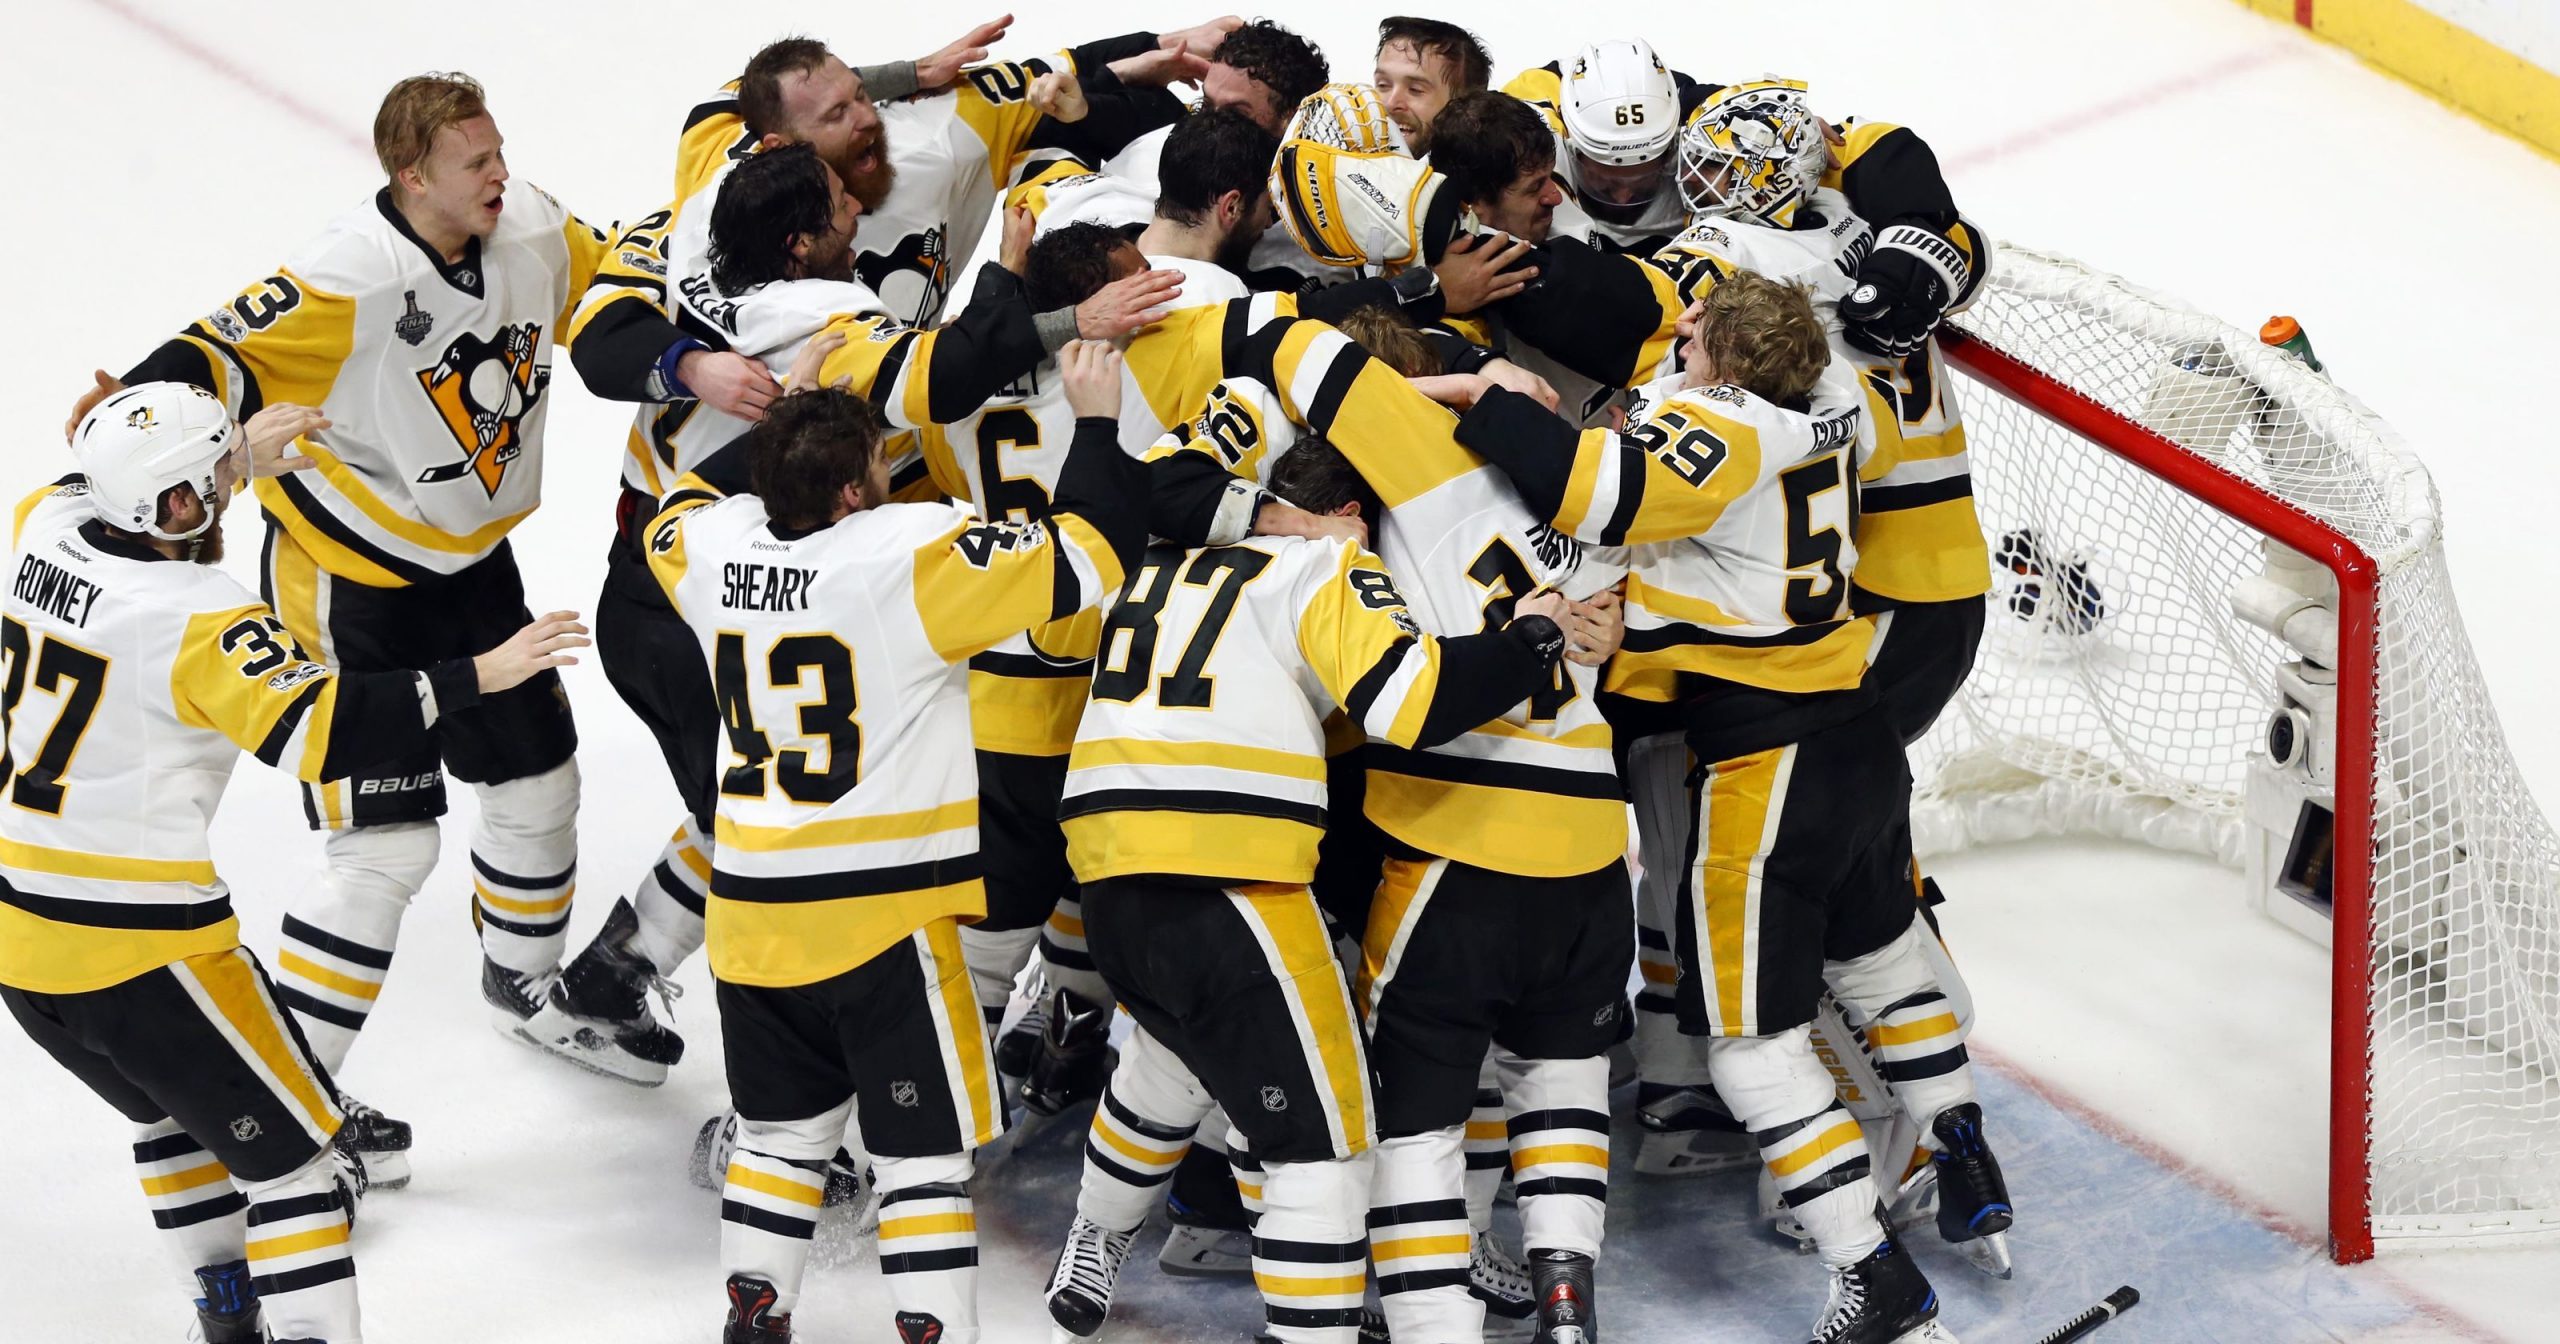 636418504583279845-USP-NHL--Stanley-Cup-Final-Pittsburgh-Penguins-at